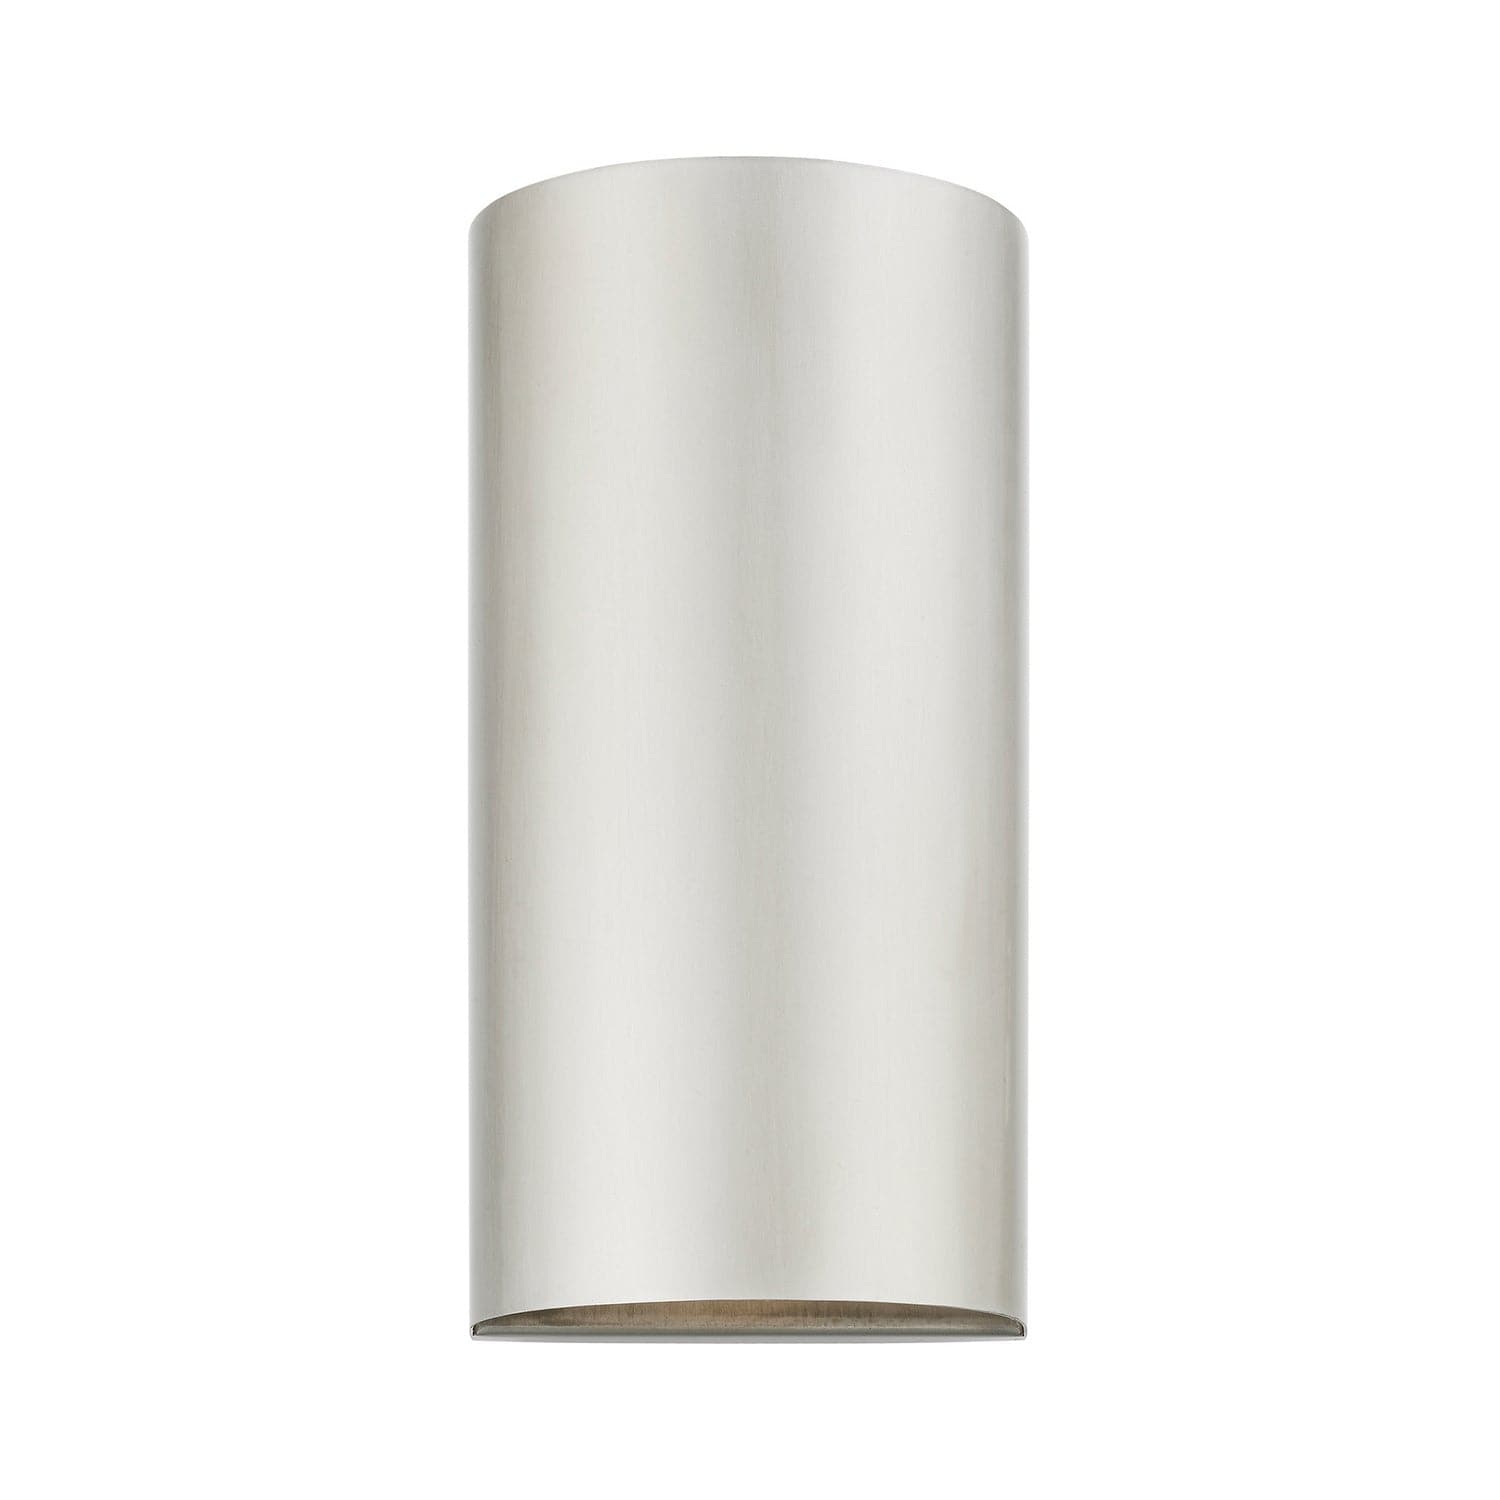 Livex Lighting - 22062-91 - One Light Outdoor Wall Sconce - Bond - Brushed Nickel